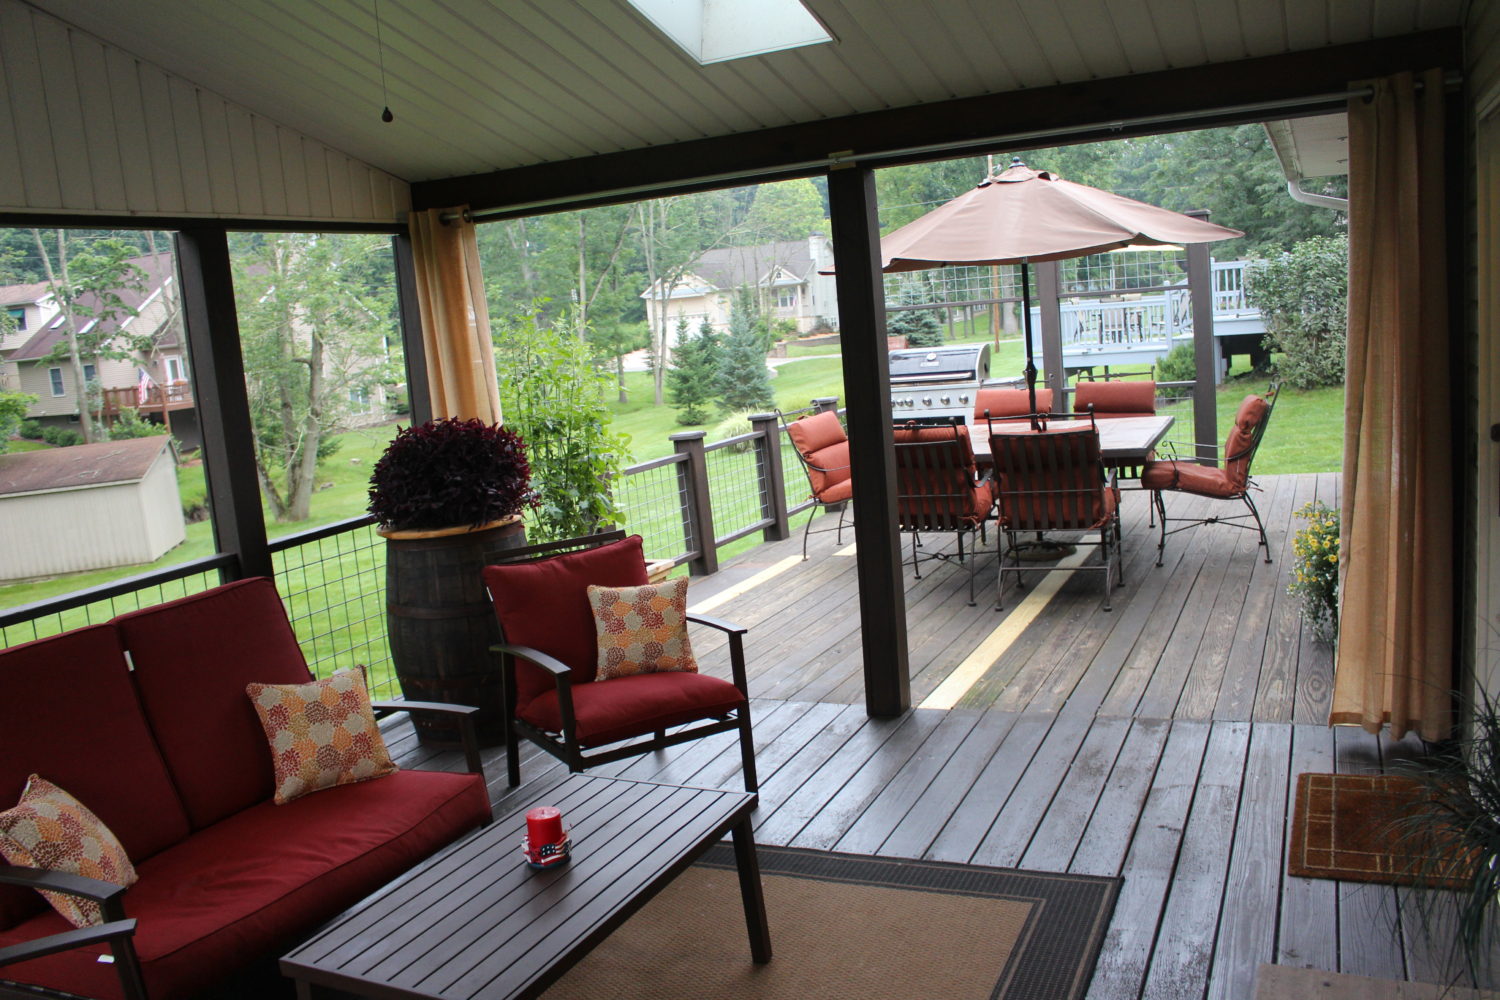 We hope completing projects like our back porch remdoel will help our house sell quickly when the time comes